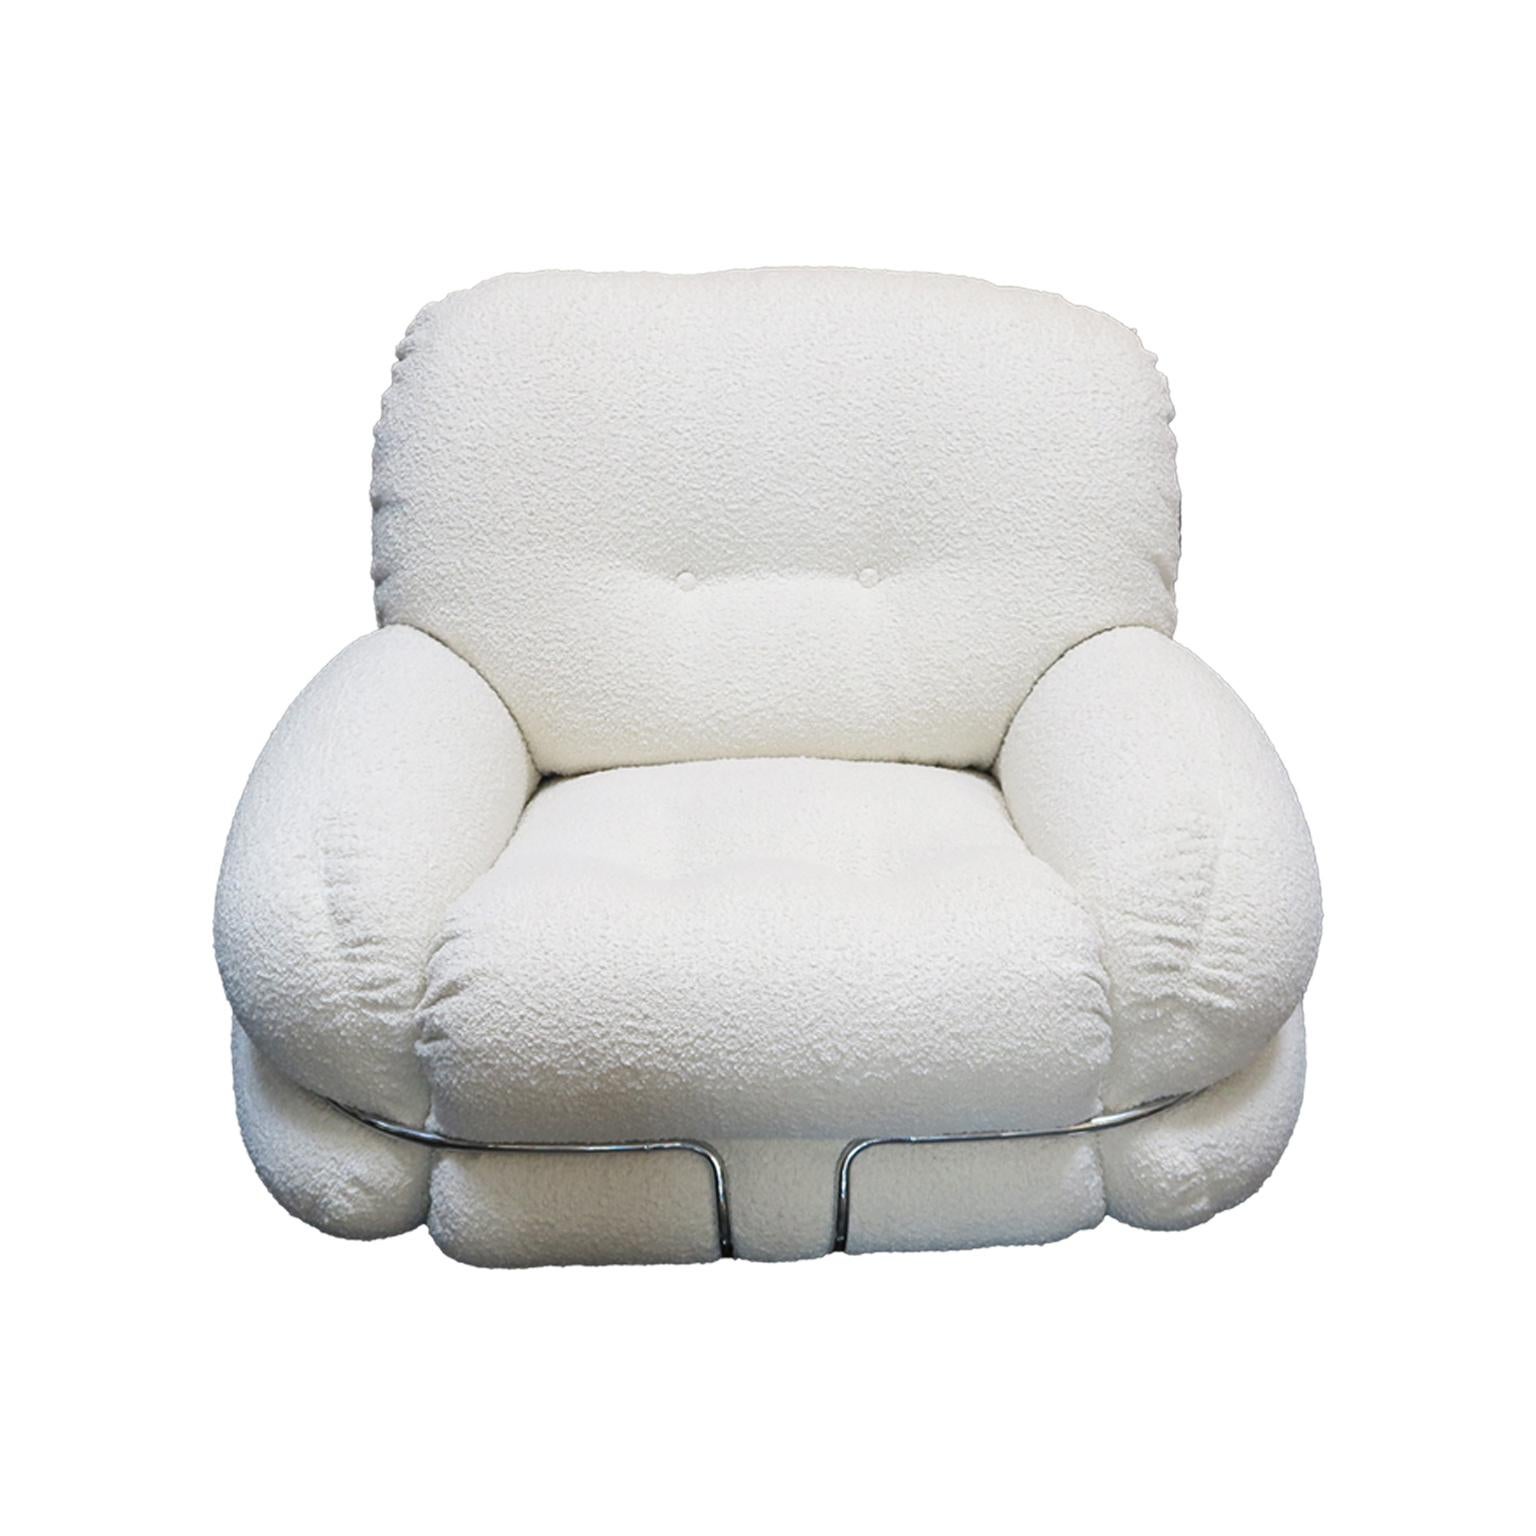 This pair of Italian Mid-Century Lounge chairs attr. to Adriano Piazzesi is newly upholstered with white bouclé fabric that features a tufted detail on the seat and back.  These chairs showcase comfortable upholstered arms, that are accented with a